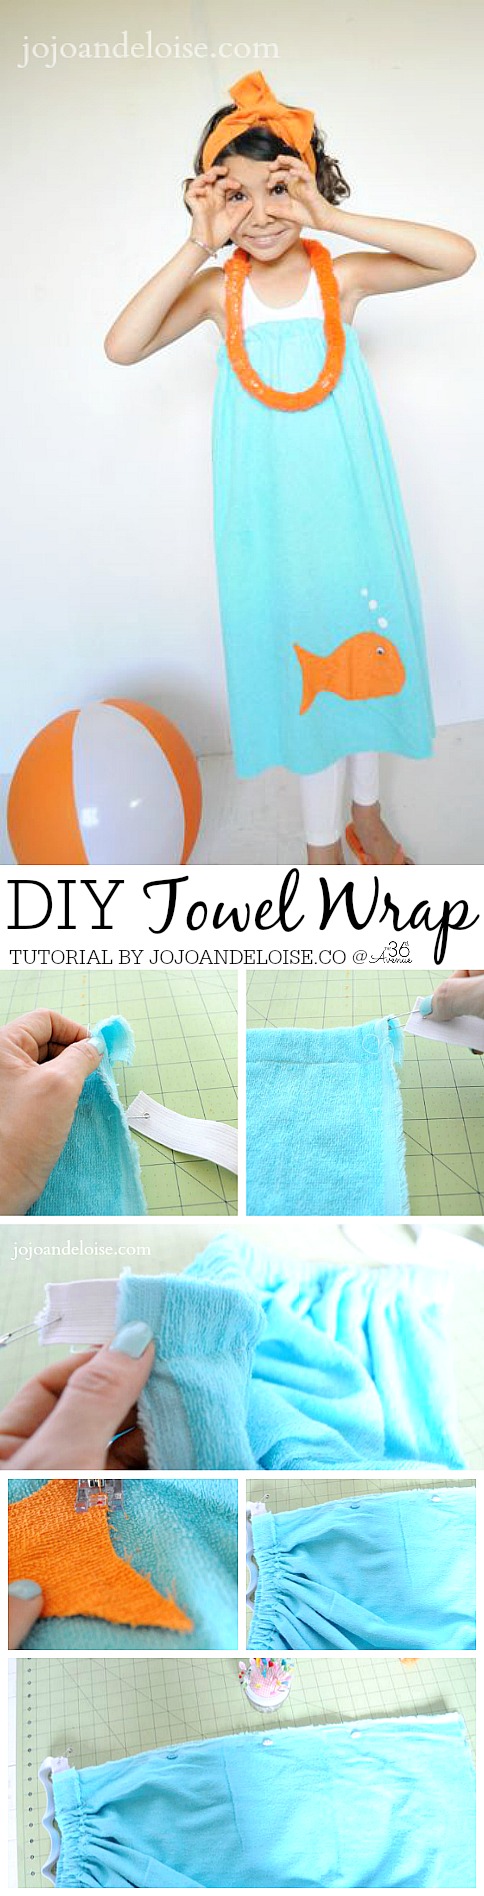 How To Make A Towel Wrap The 36th Avenue